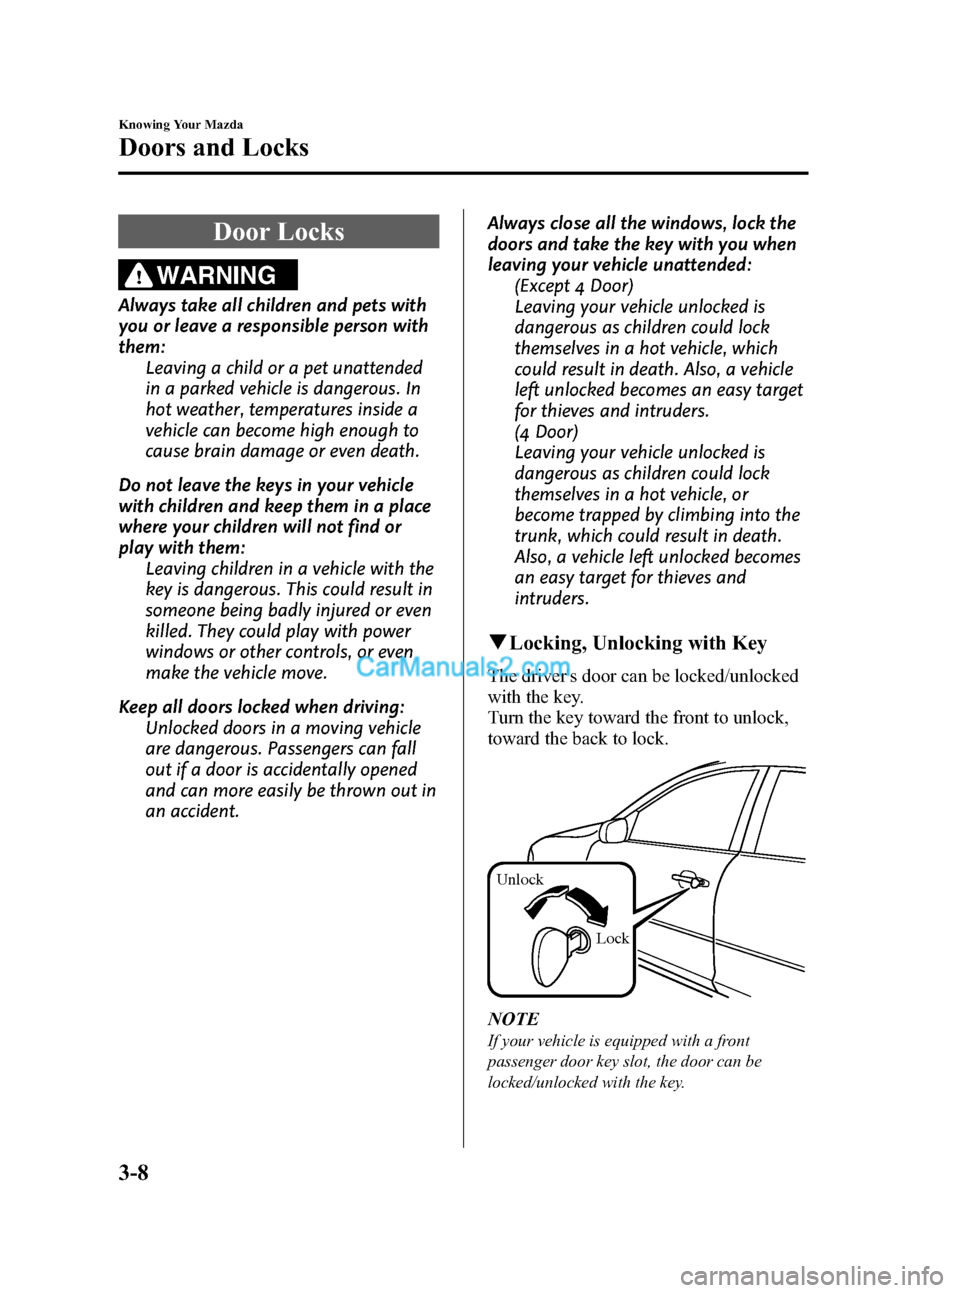 MAZDA MODEL MAZDASPEED 3 2008   (in English) Manual PDF Black plate (80,1)
Door Locks
WARNING
Always take all children and pets with
you or leave a responsible person with
them:
Leaving a child or a pet unattended
in a parked vehicle is dangerous. In
hot w